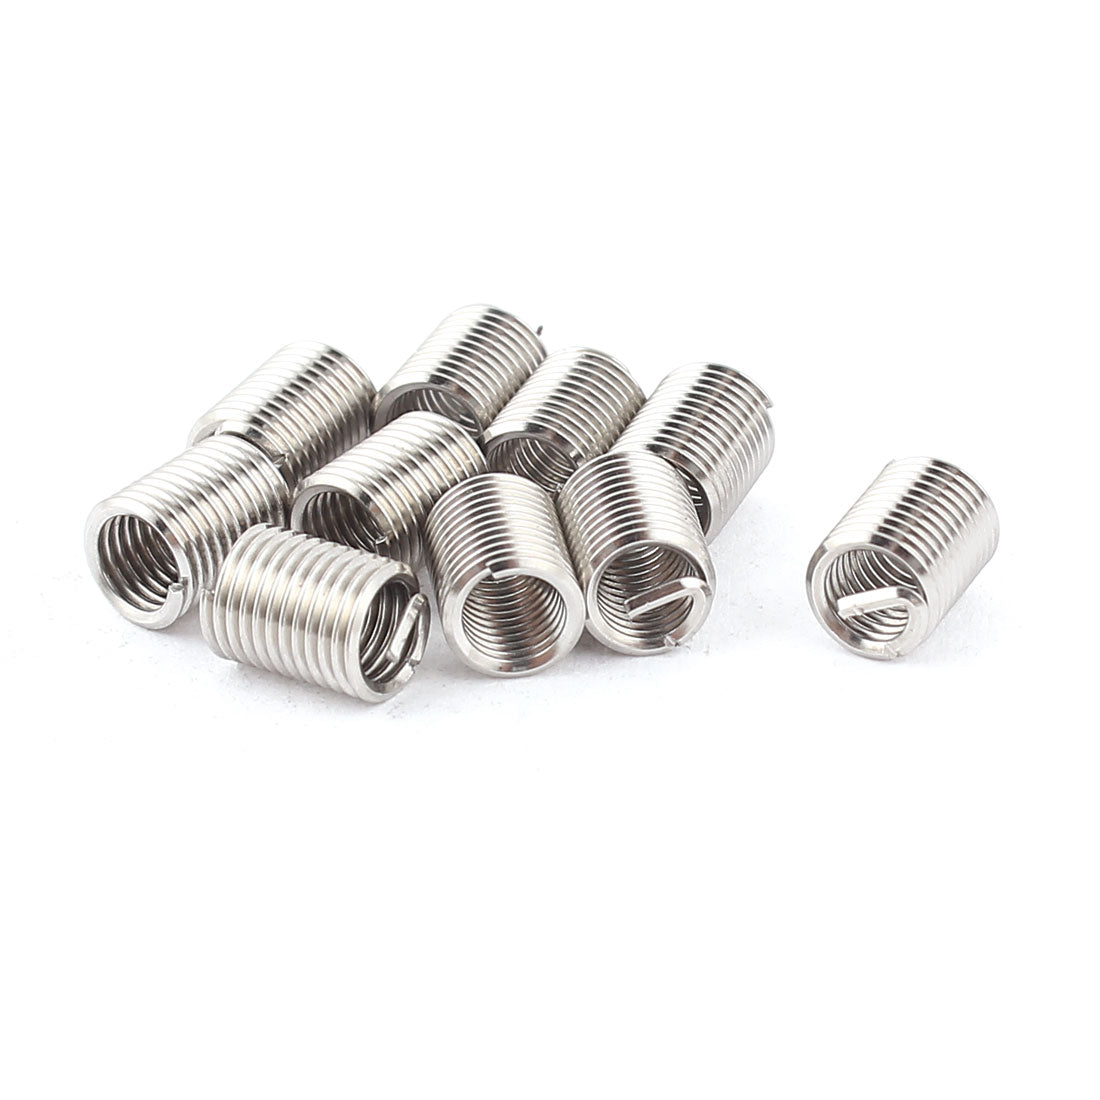 uxcell Uxcell 10Pcs 304 Stainless Steel Helicoil Wire Thread Repair Inserts M4 x 0.7mm x 2.5D